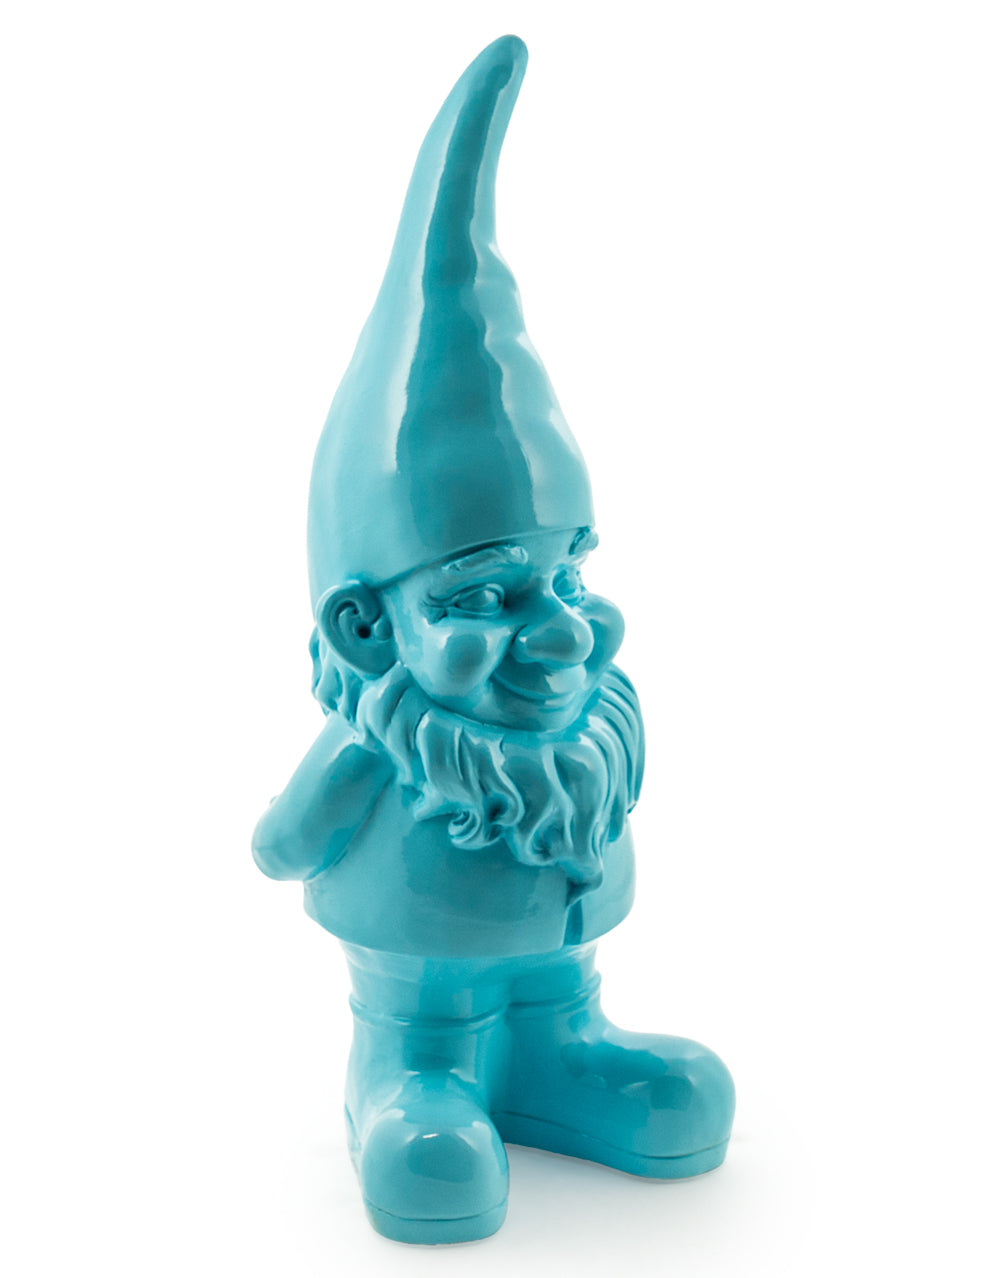 Large Bright Blue Standing Gnome Figure